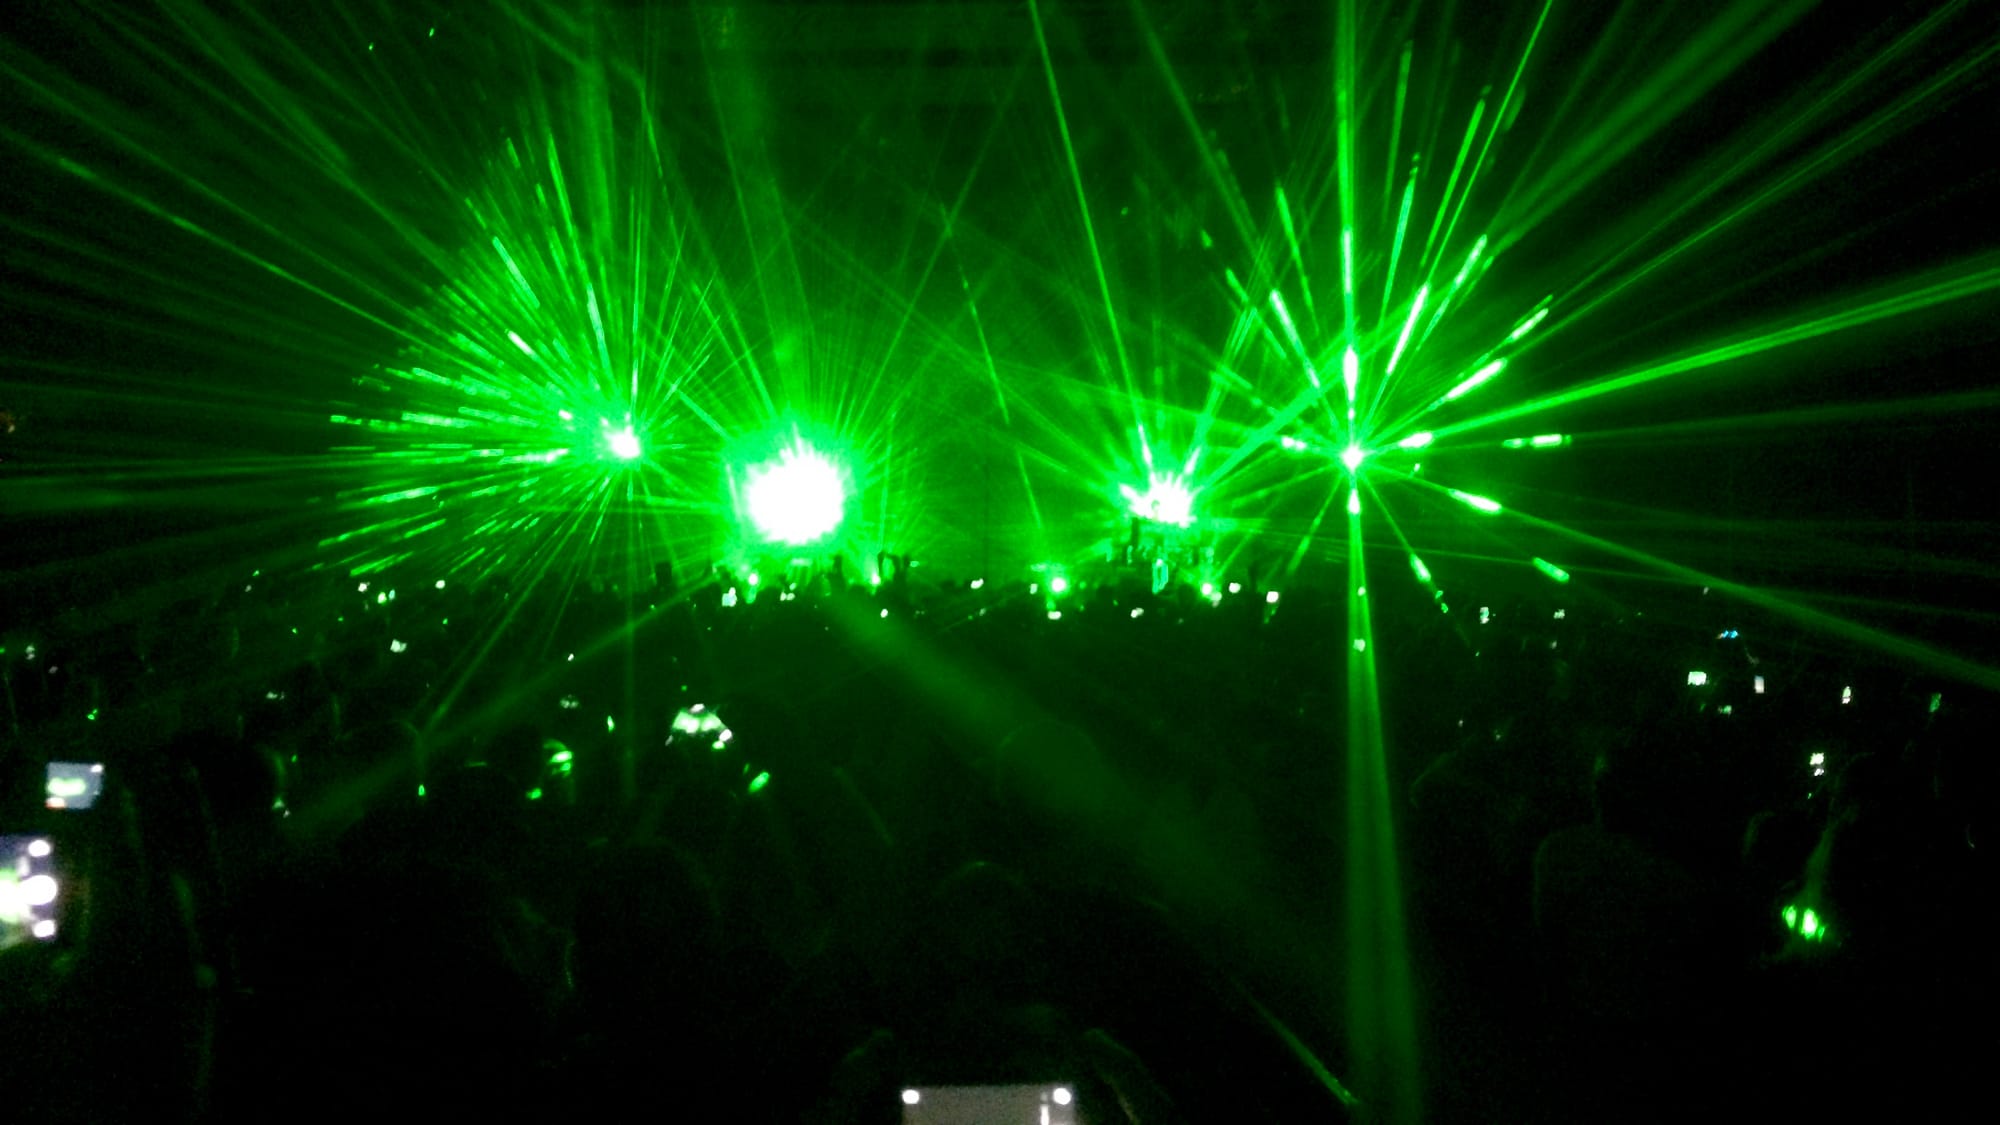 A picture from a concert with many lasers